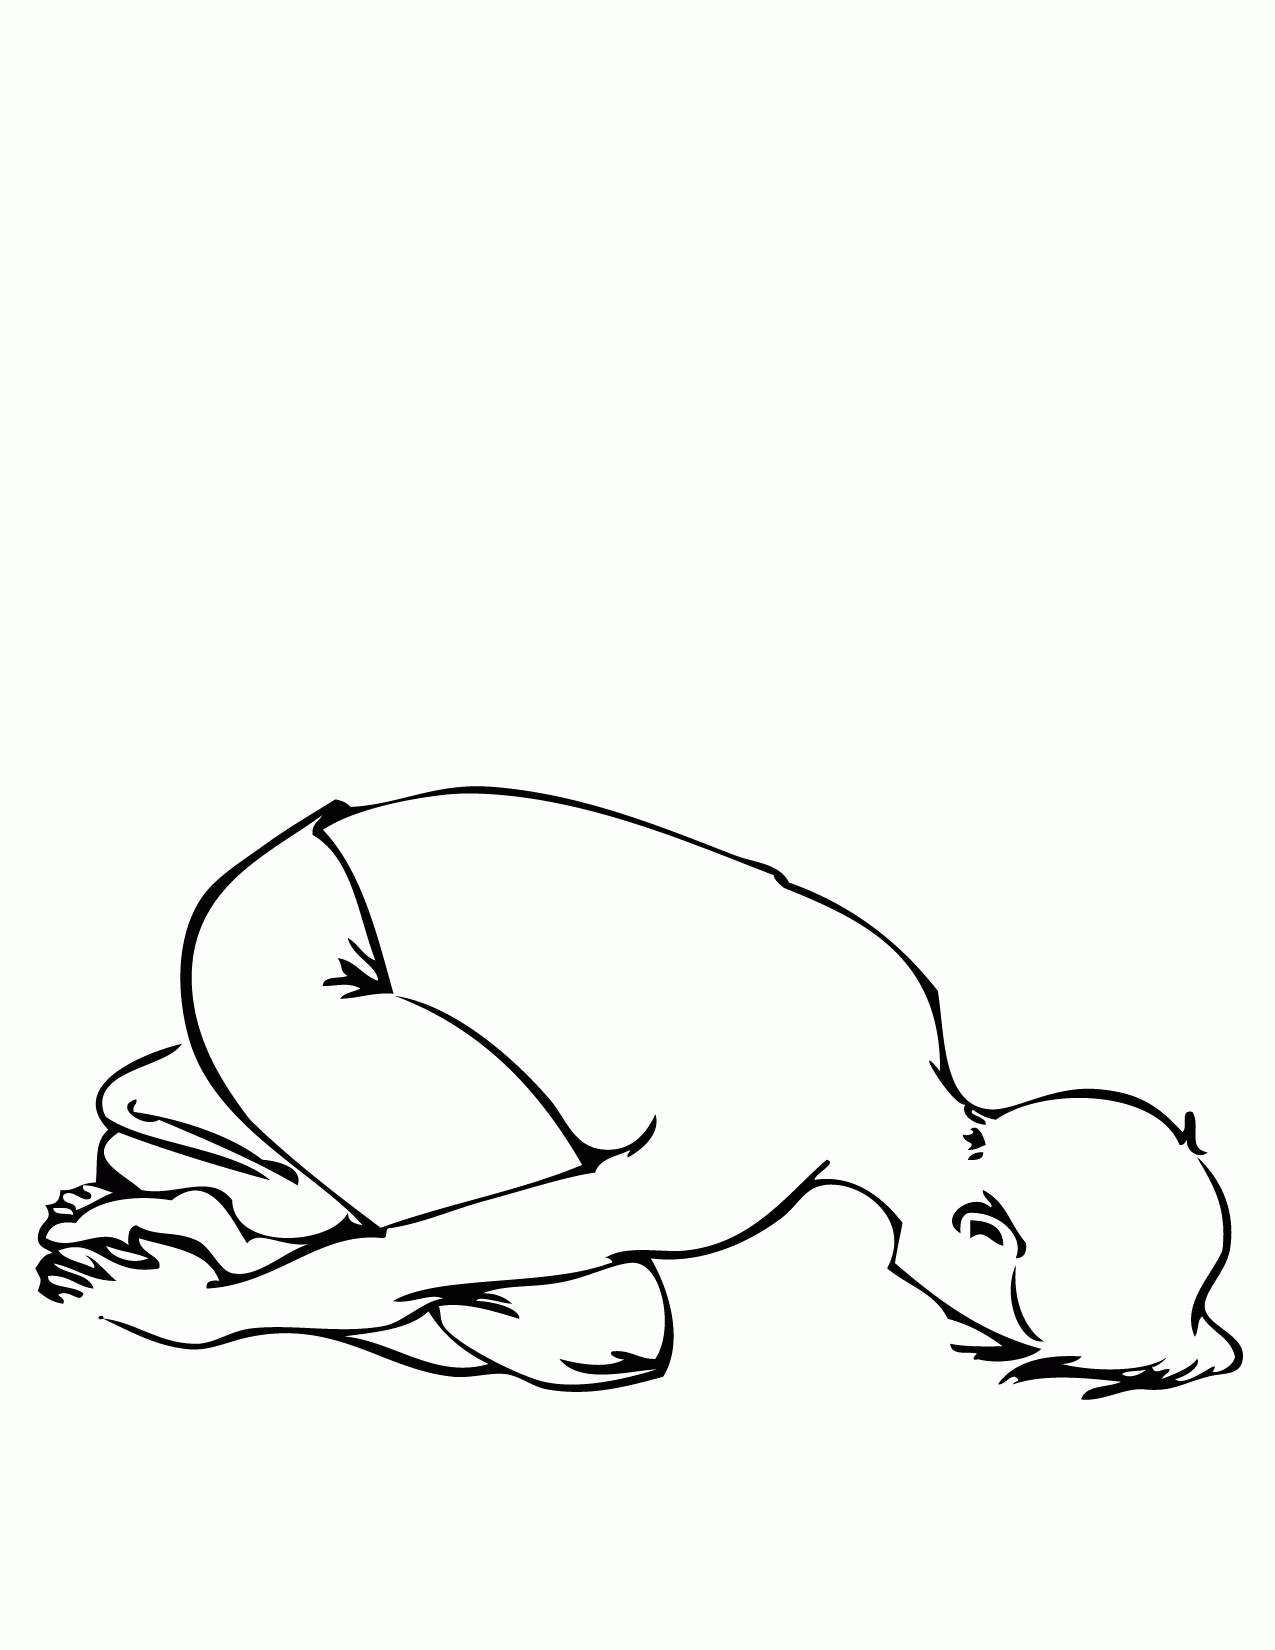 Child Pose Coloring Page - Handipoints